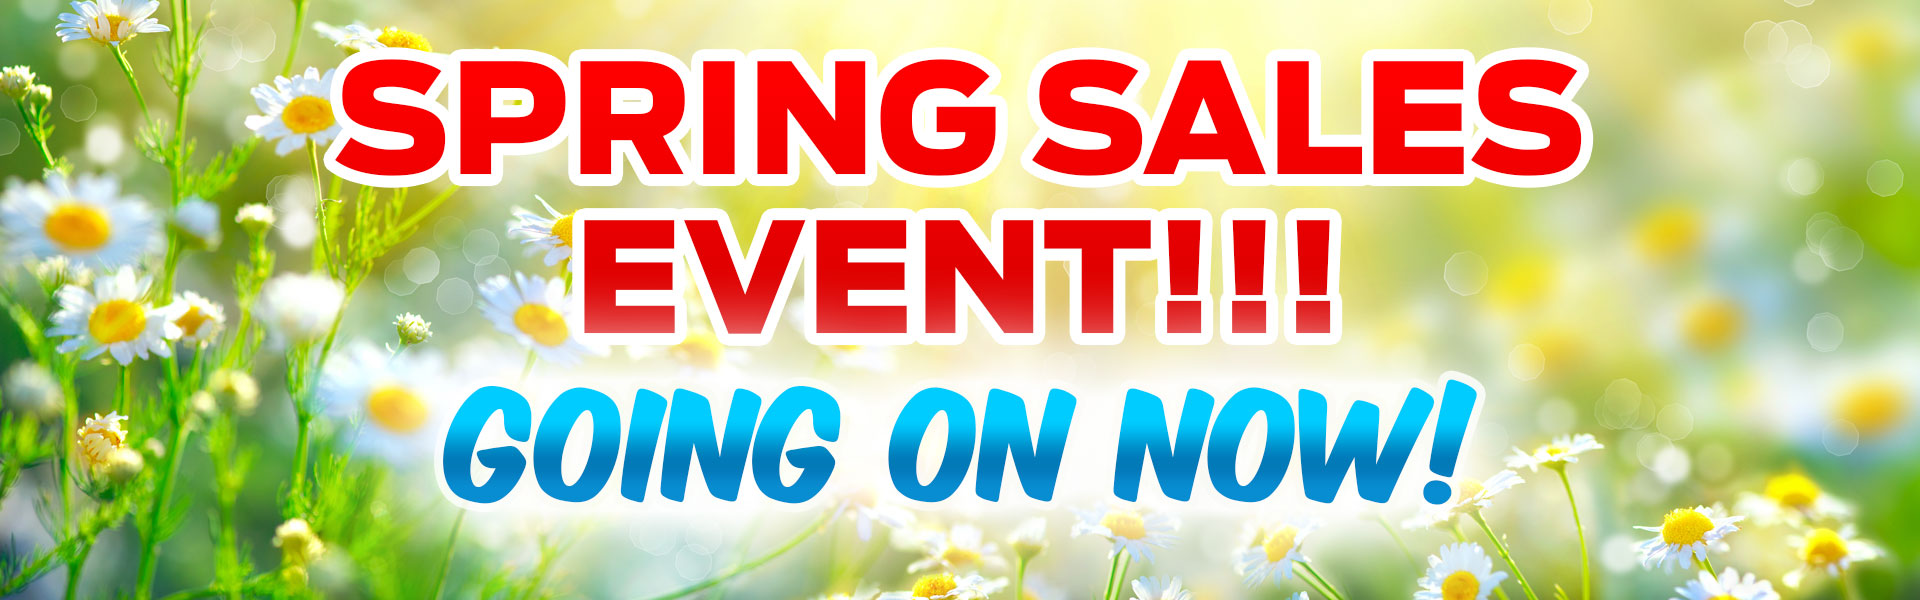 City Ford Spring Sales Event!